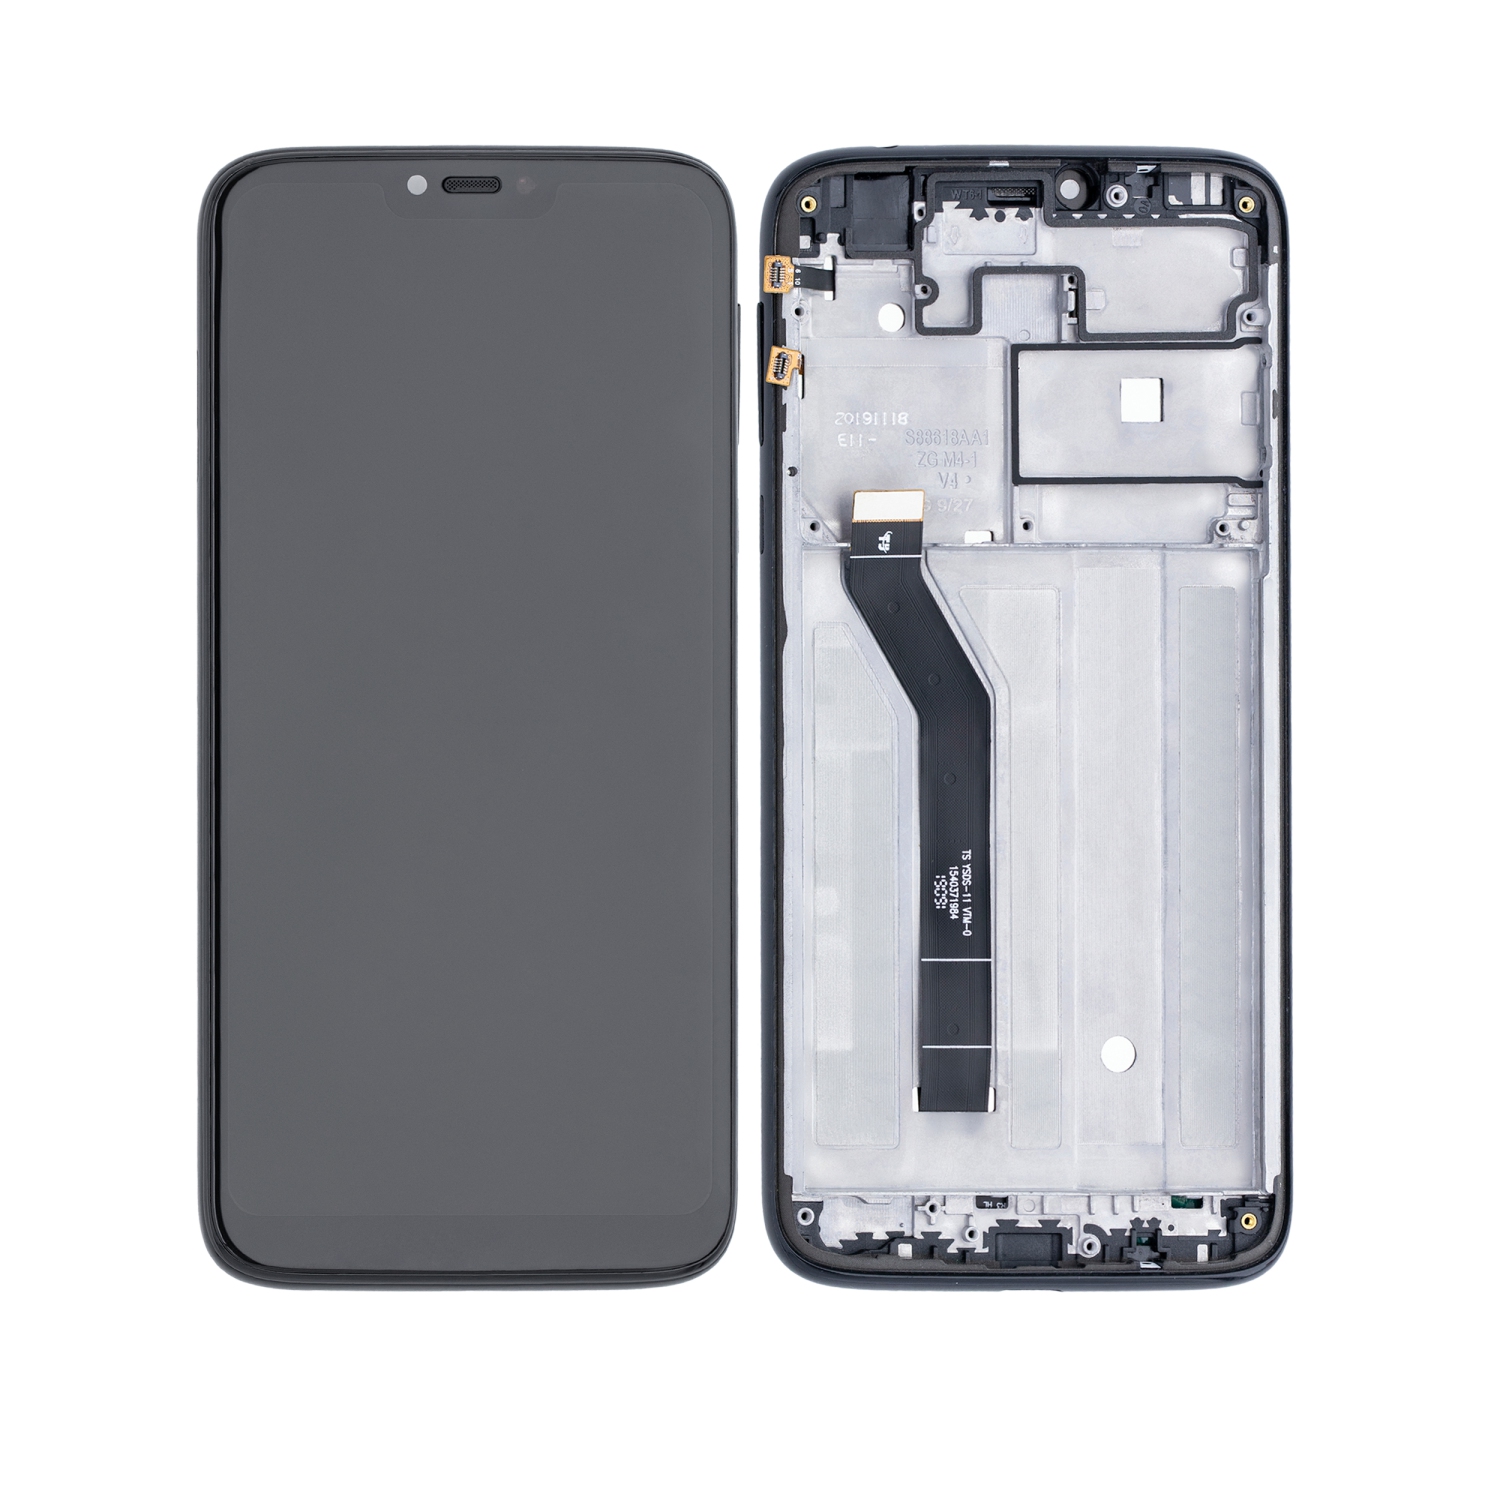 Refurbished (Excellent) - Replacement LCD Assembly With Frame Compatible For Motorola Moto G7 Power (XT1955-1/2/4/7 / 2019) (International Version) (154MM) (Ceramic Black)